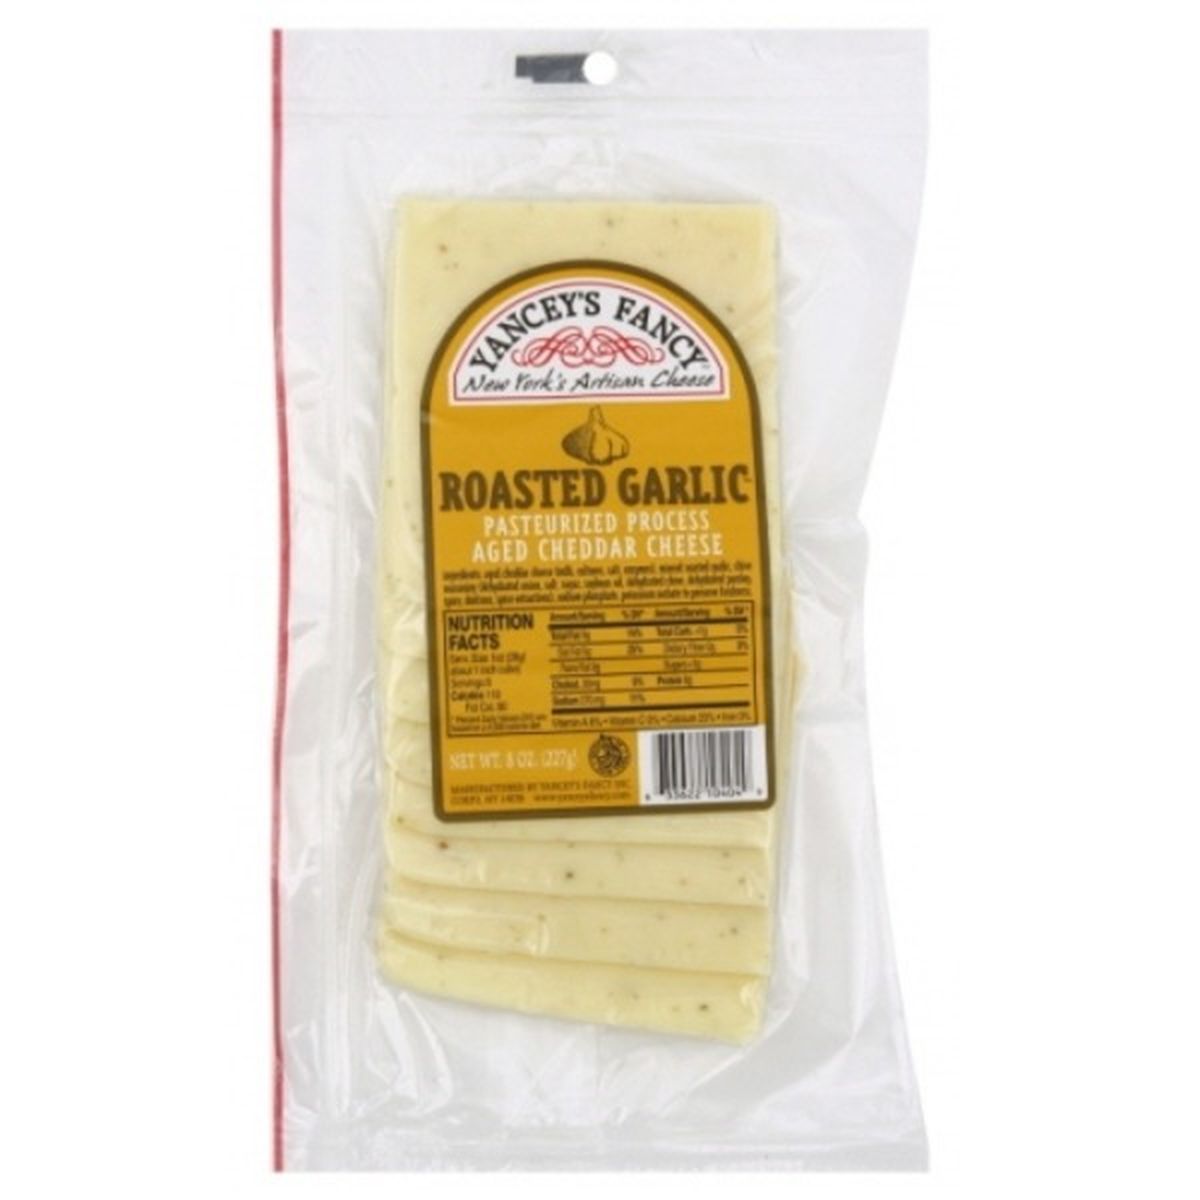 Calories in Yancey's Fancy Cheese, Pasteurized Process, Aged Cheddar, Roasted Garlic